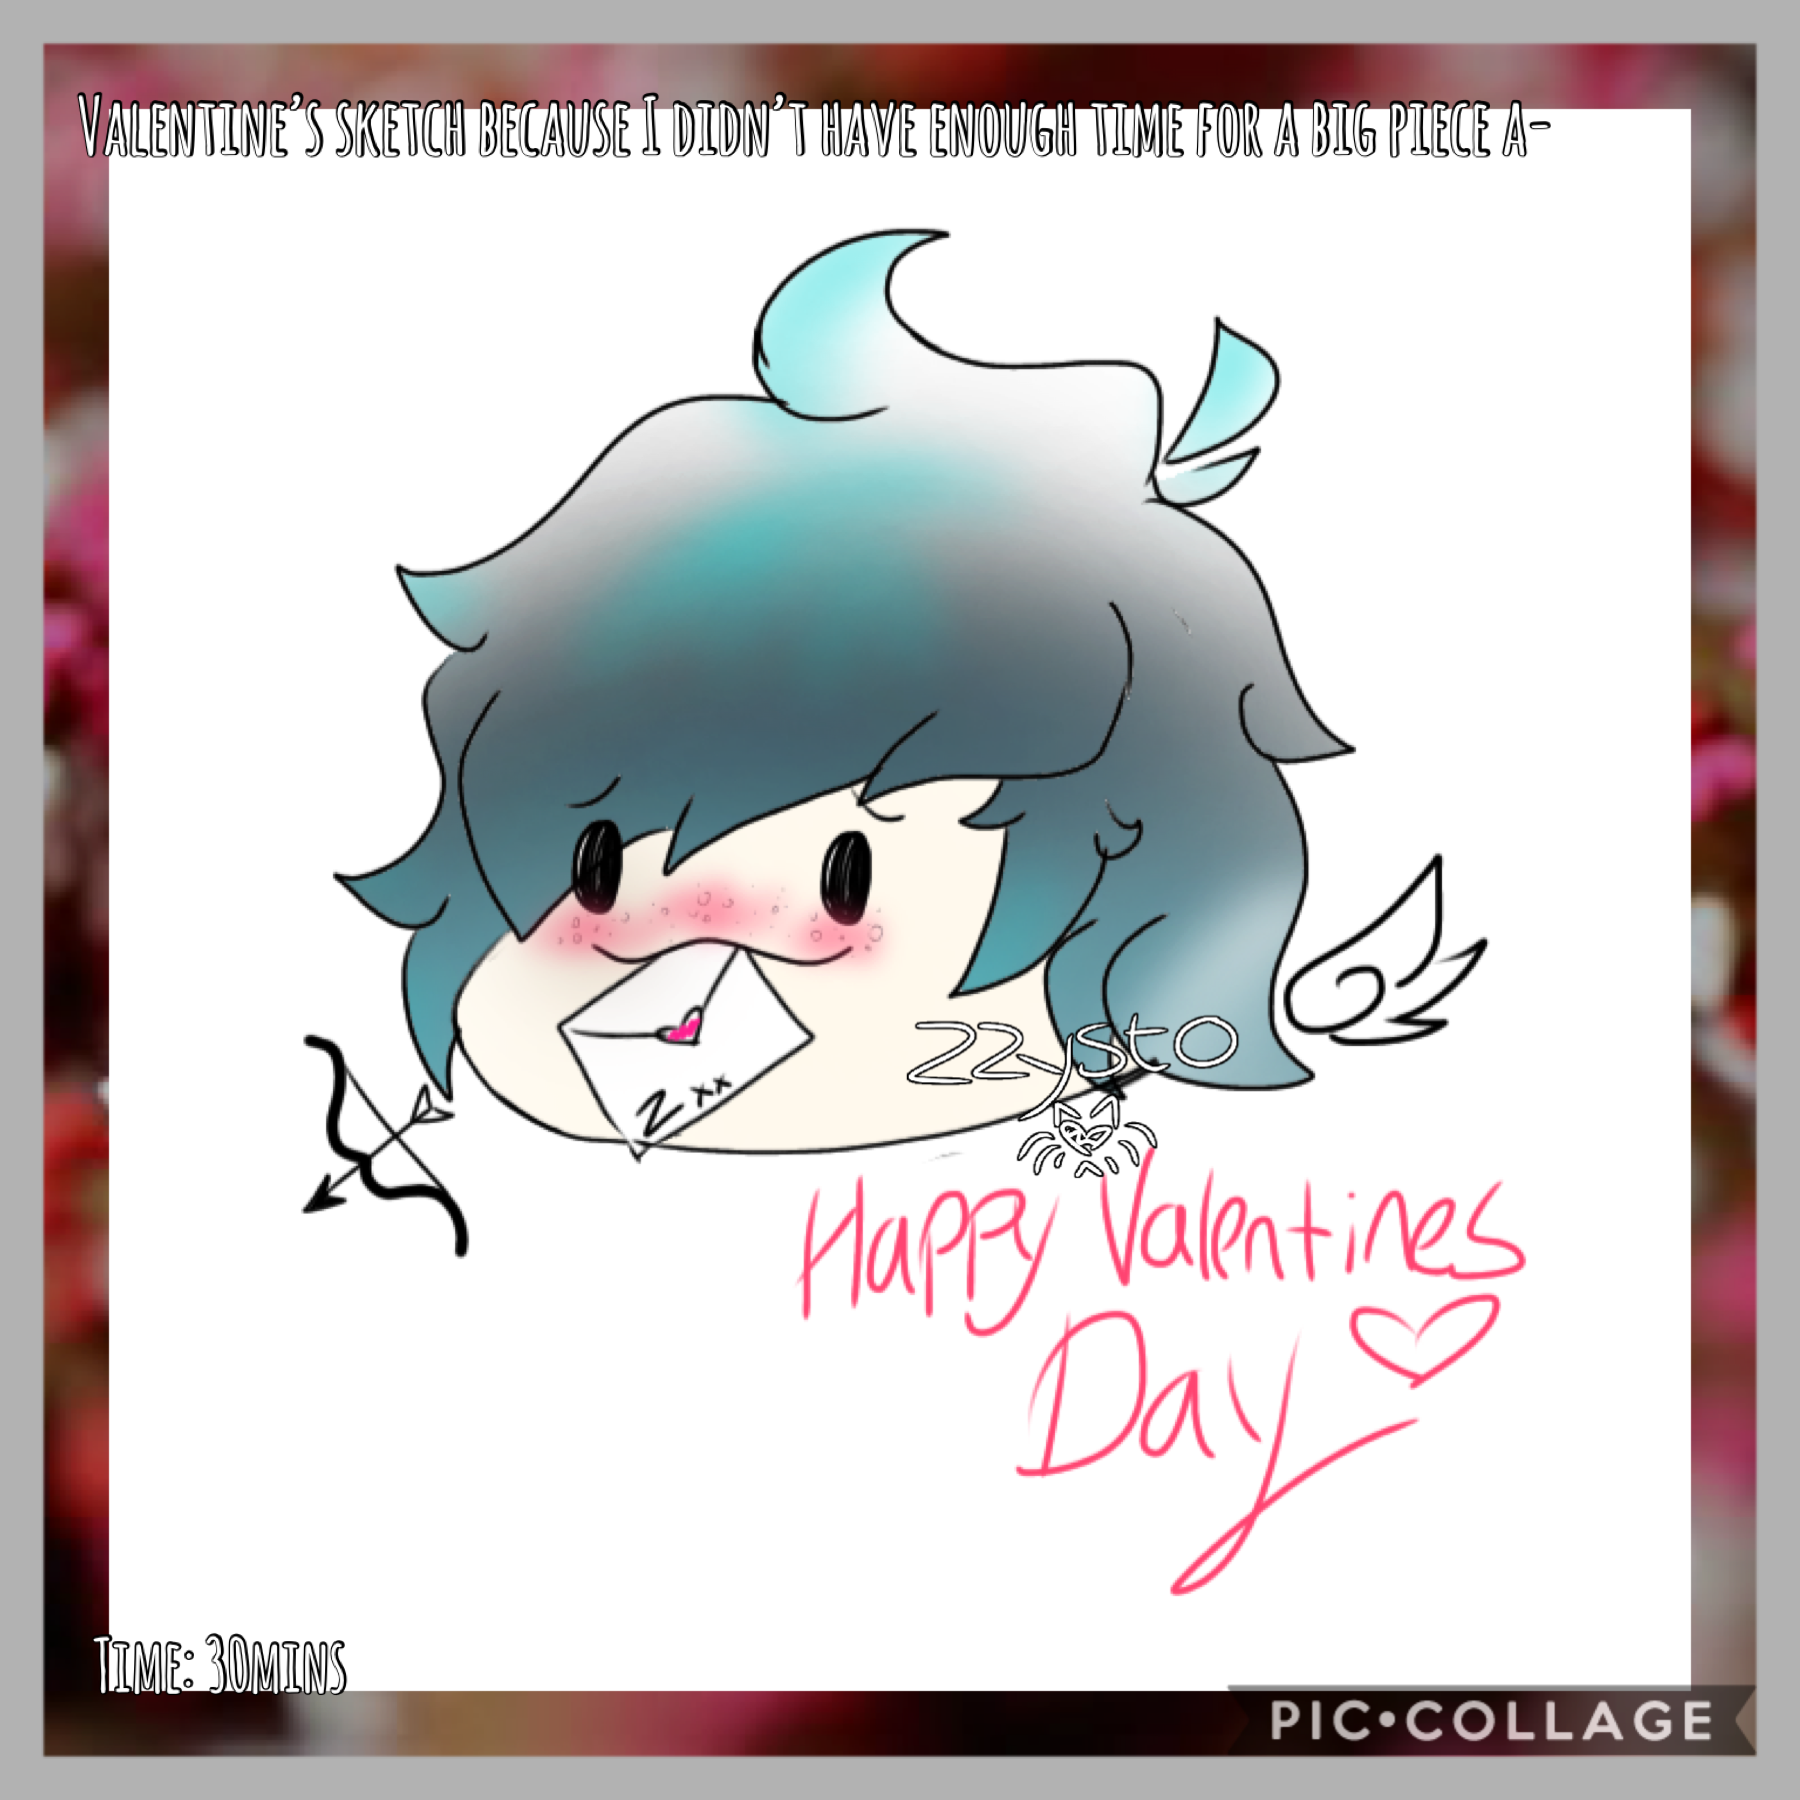 💞💕Tap💕💞
we all know who that letter is for (it’s not Zysto)~
Happy Valentine’s Day..!
I hope you all have a good day with one’s you love, whether it’s partners, family or friends. If not, then know that I and my ocs all love y’all so so much and mean so m